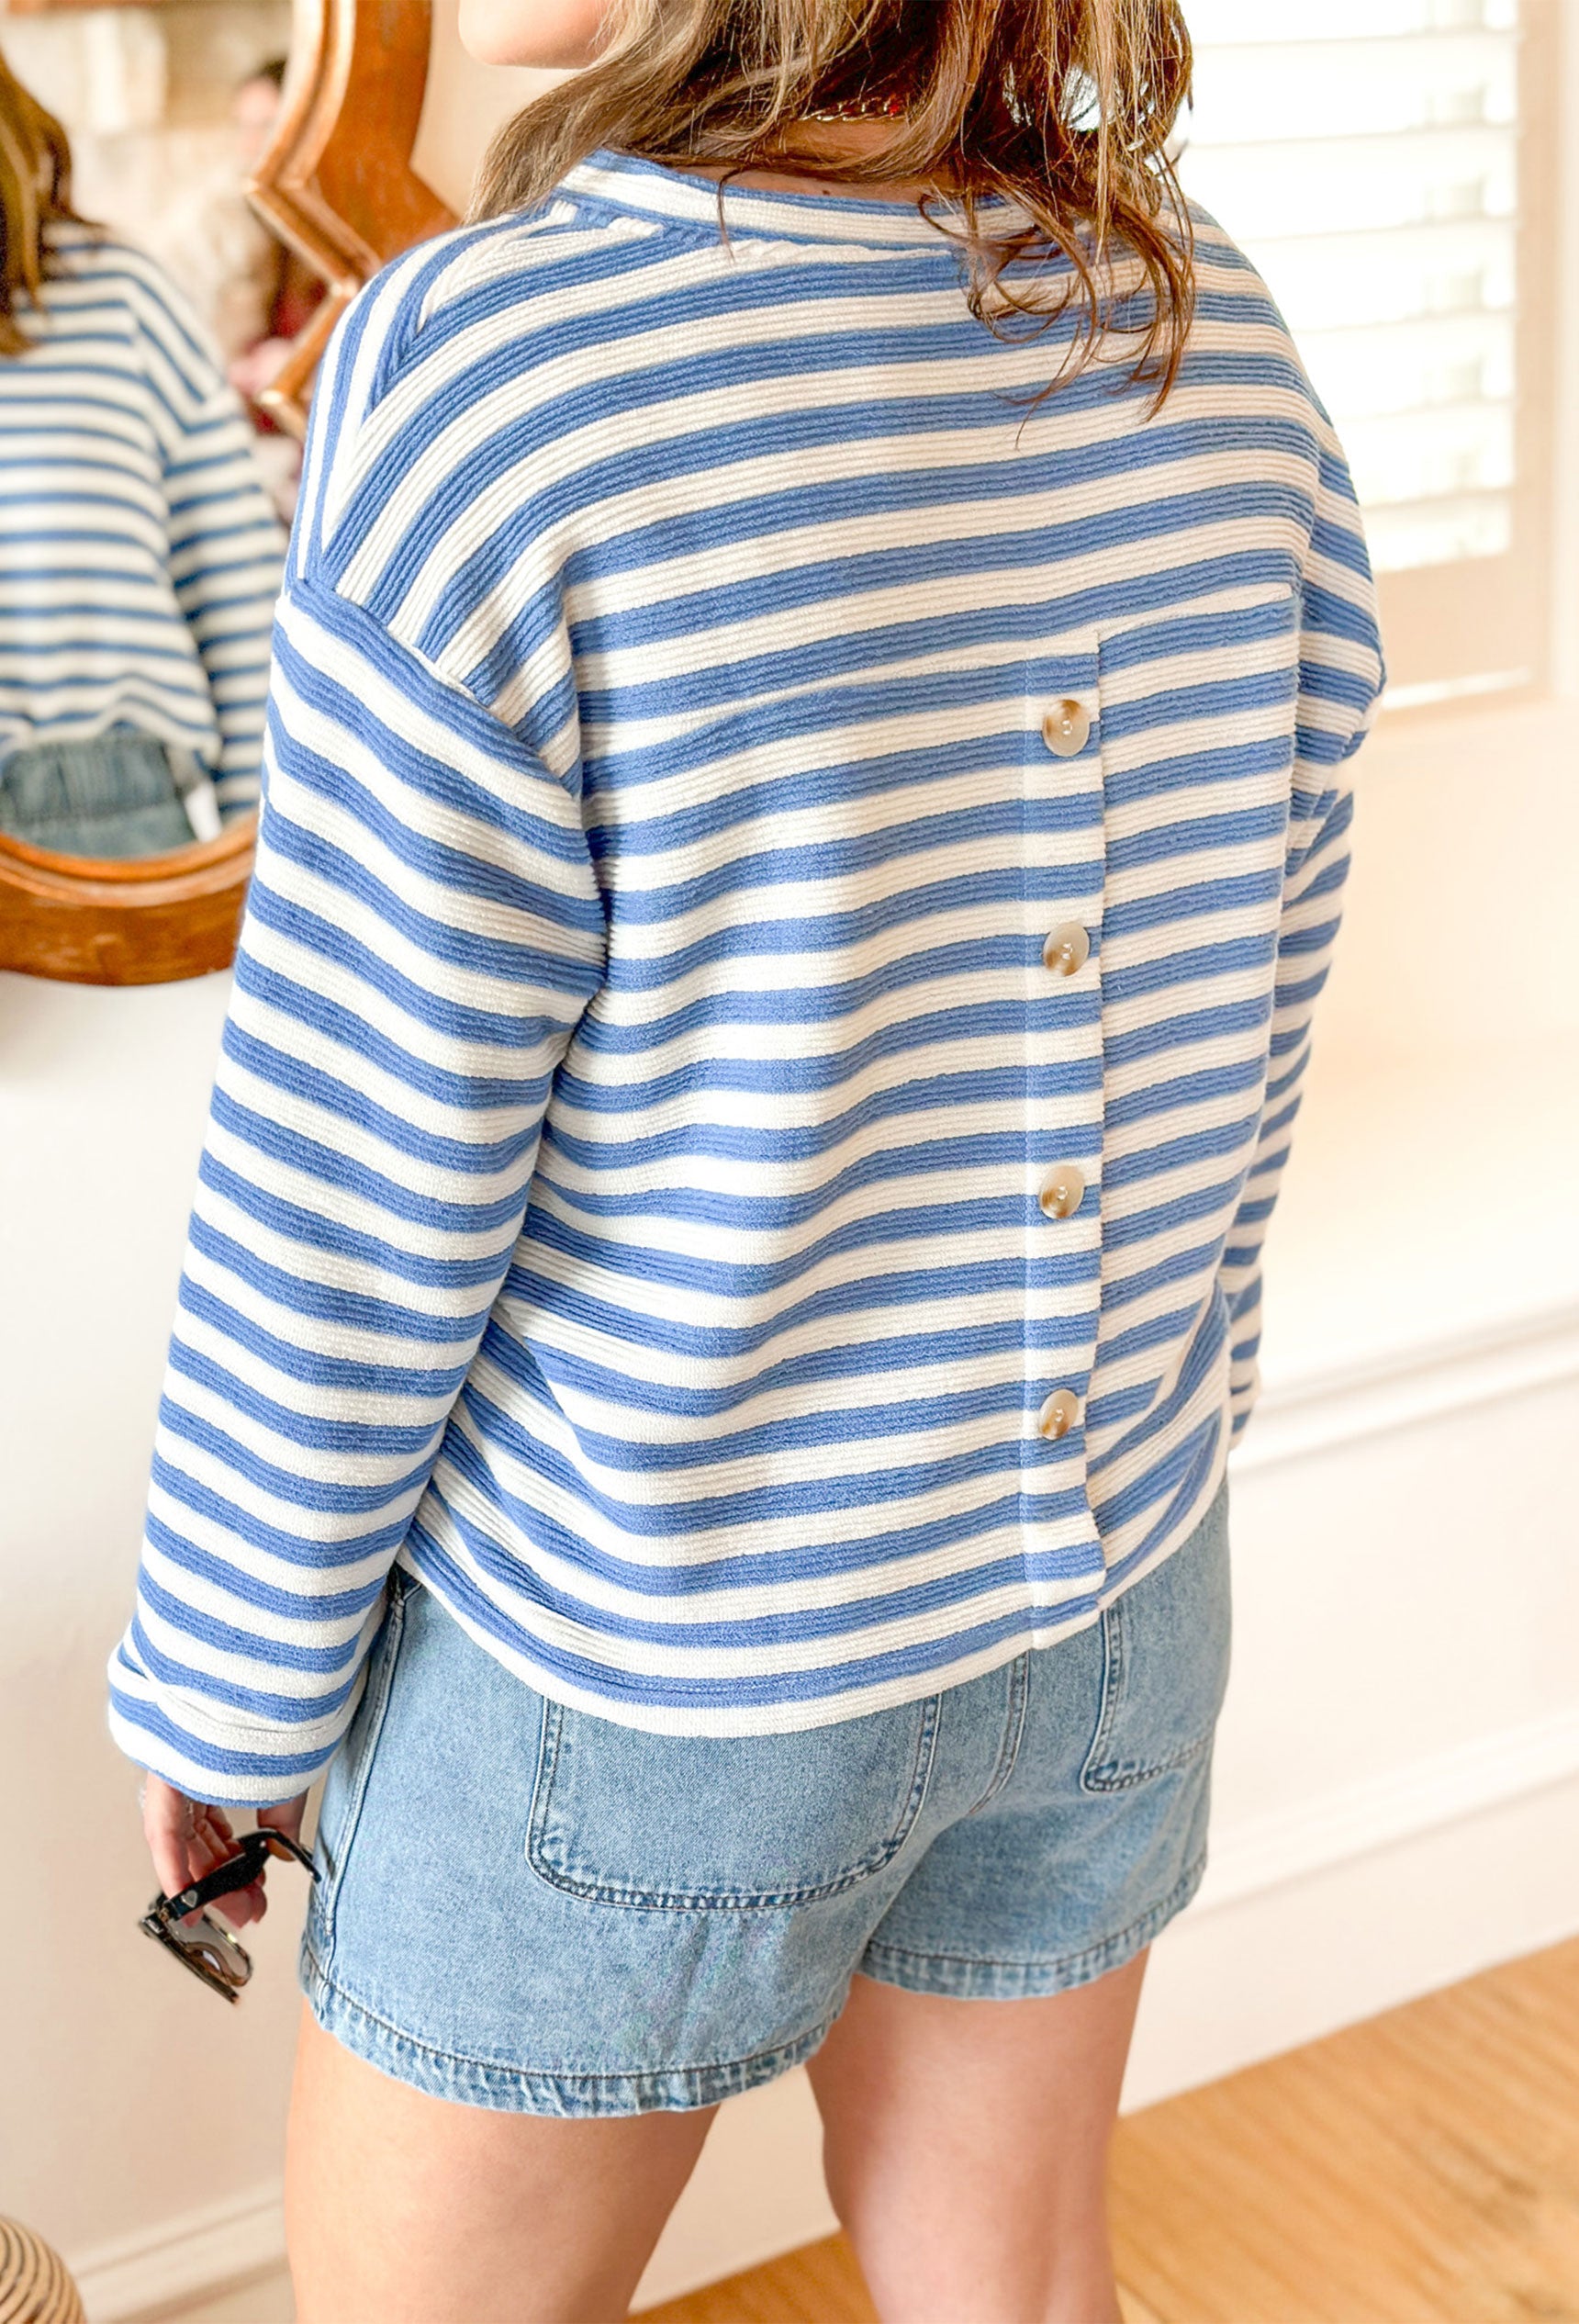 Taking The Time Striped Sweater, blue and white striped top with cuffed sleeve and v-neck